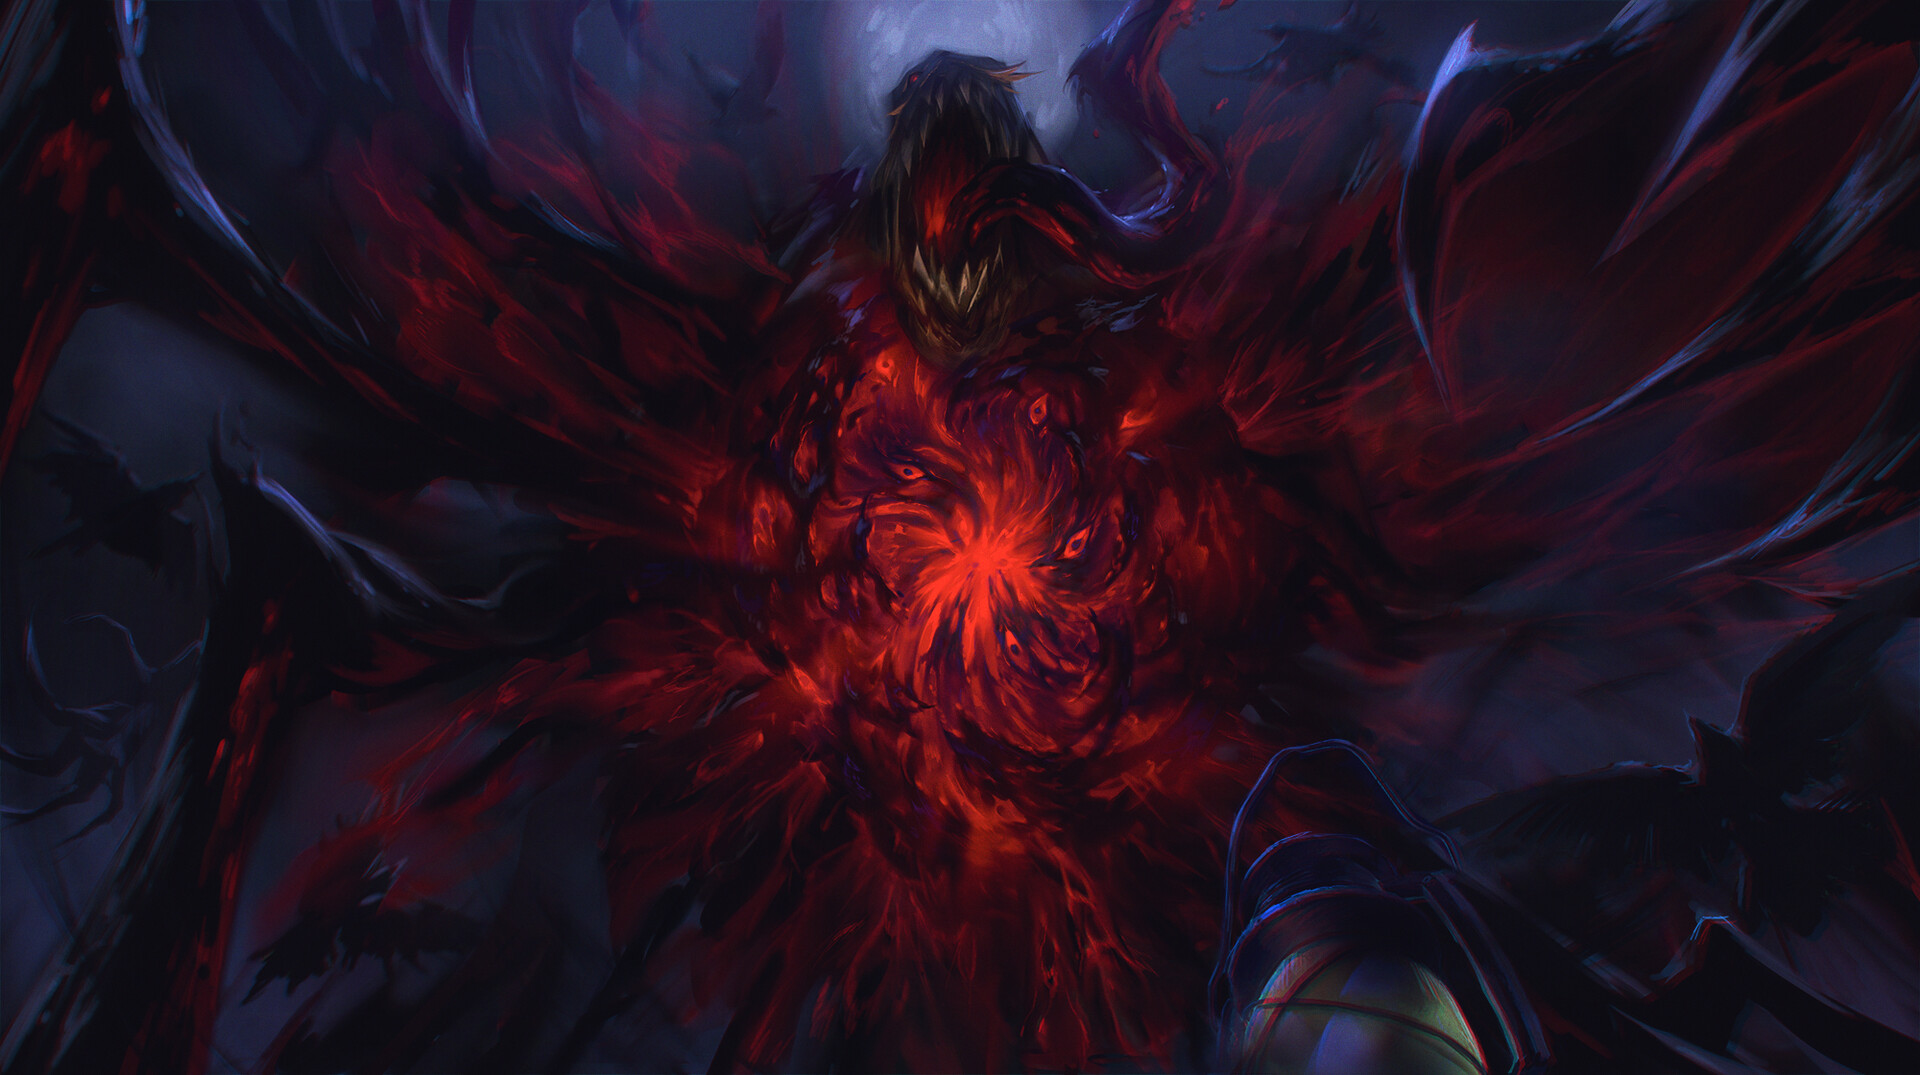 Fiddlesticks Riot Games PC Gaming Nightmare Red Zoe Zhu Crow League Of Legends 1920x1075